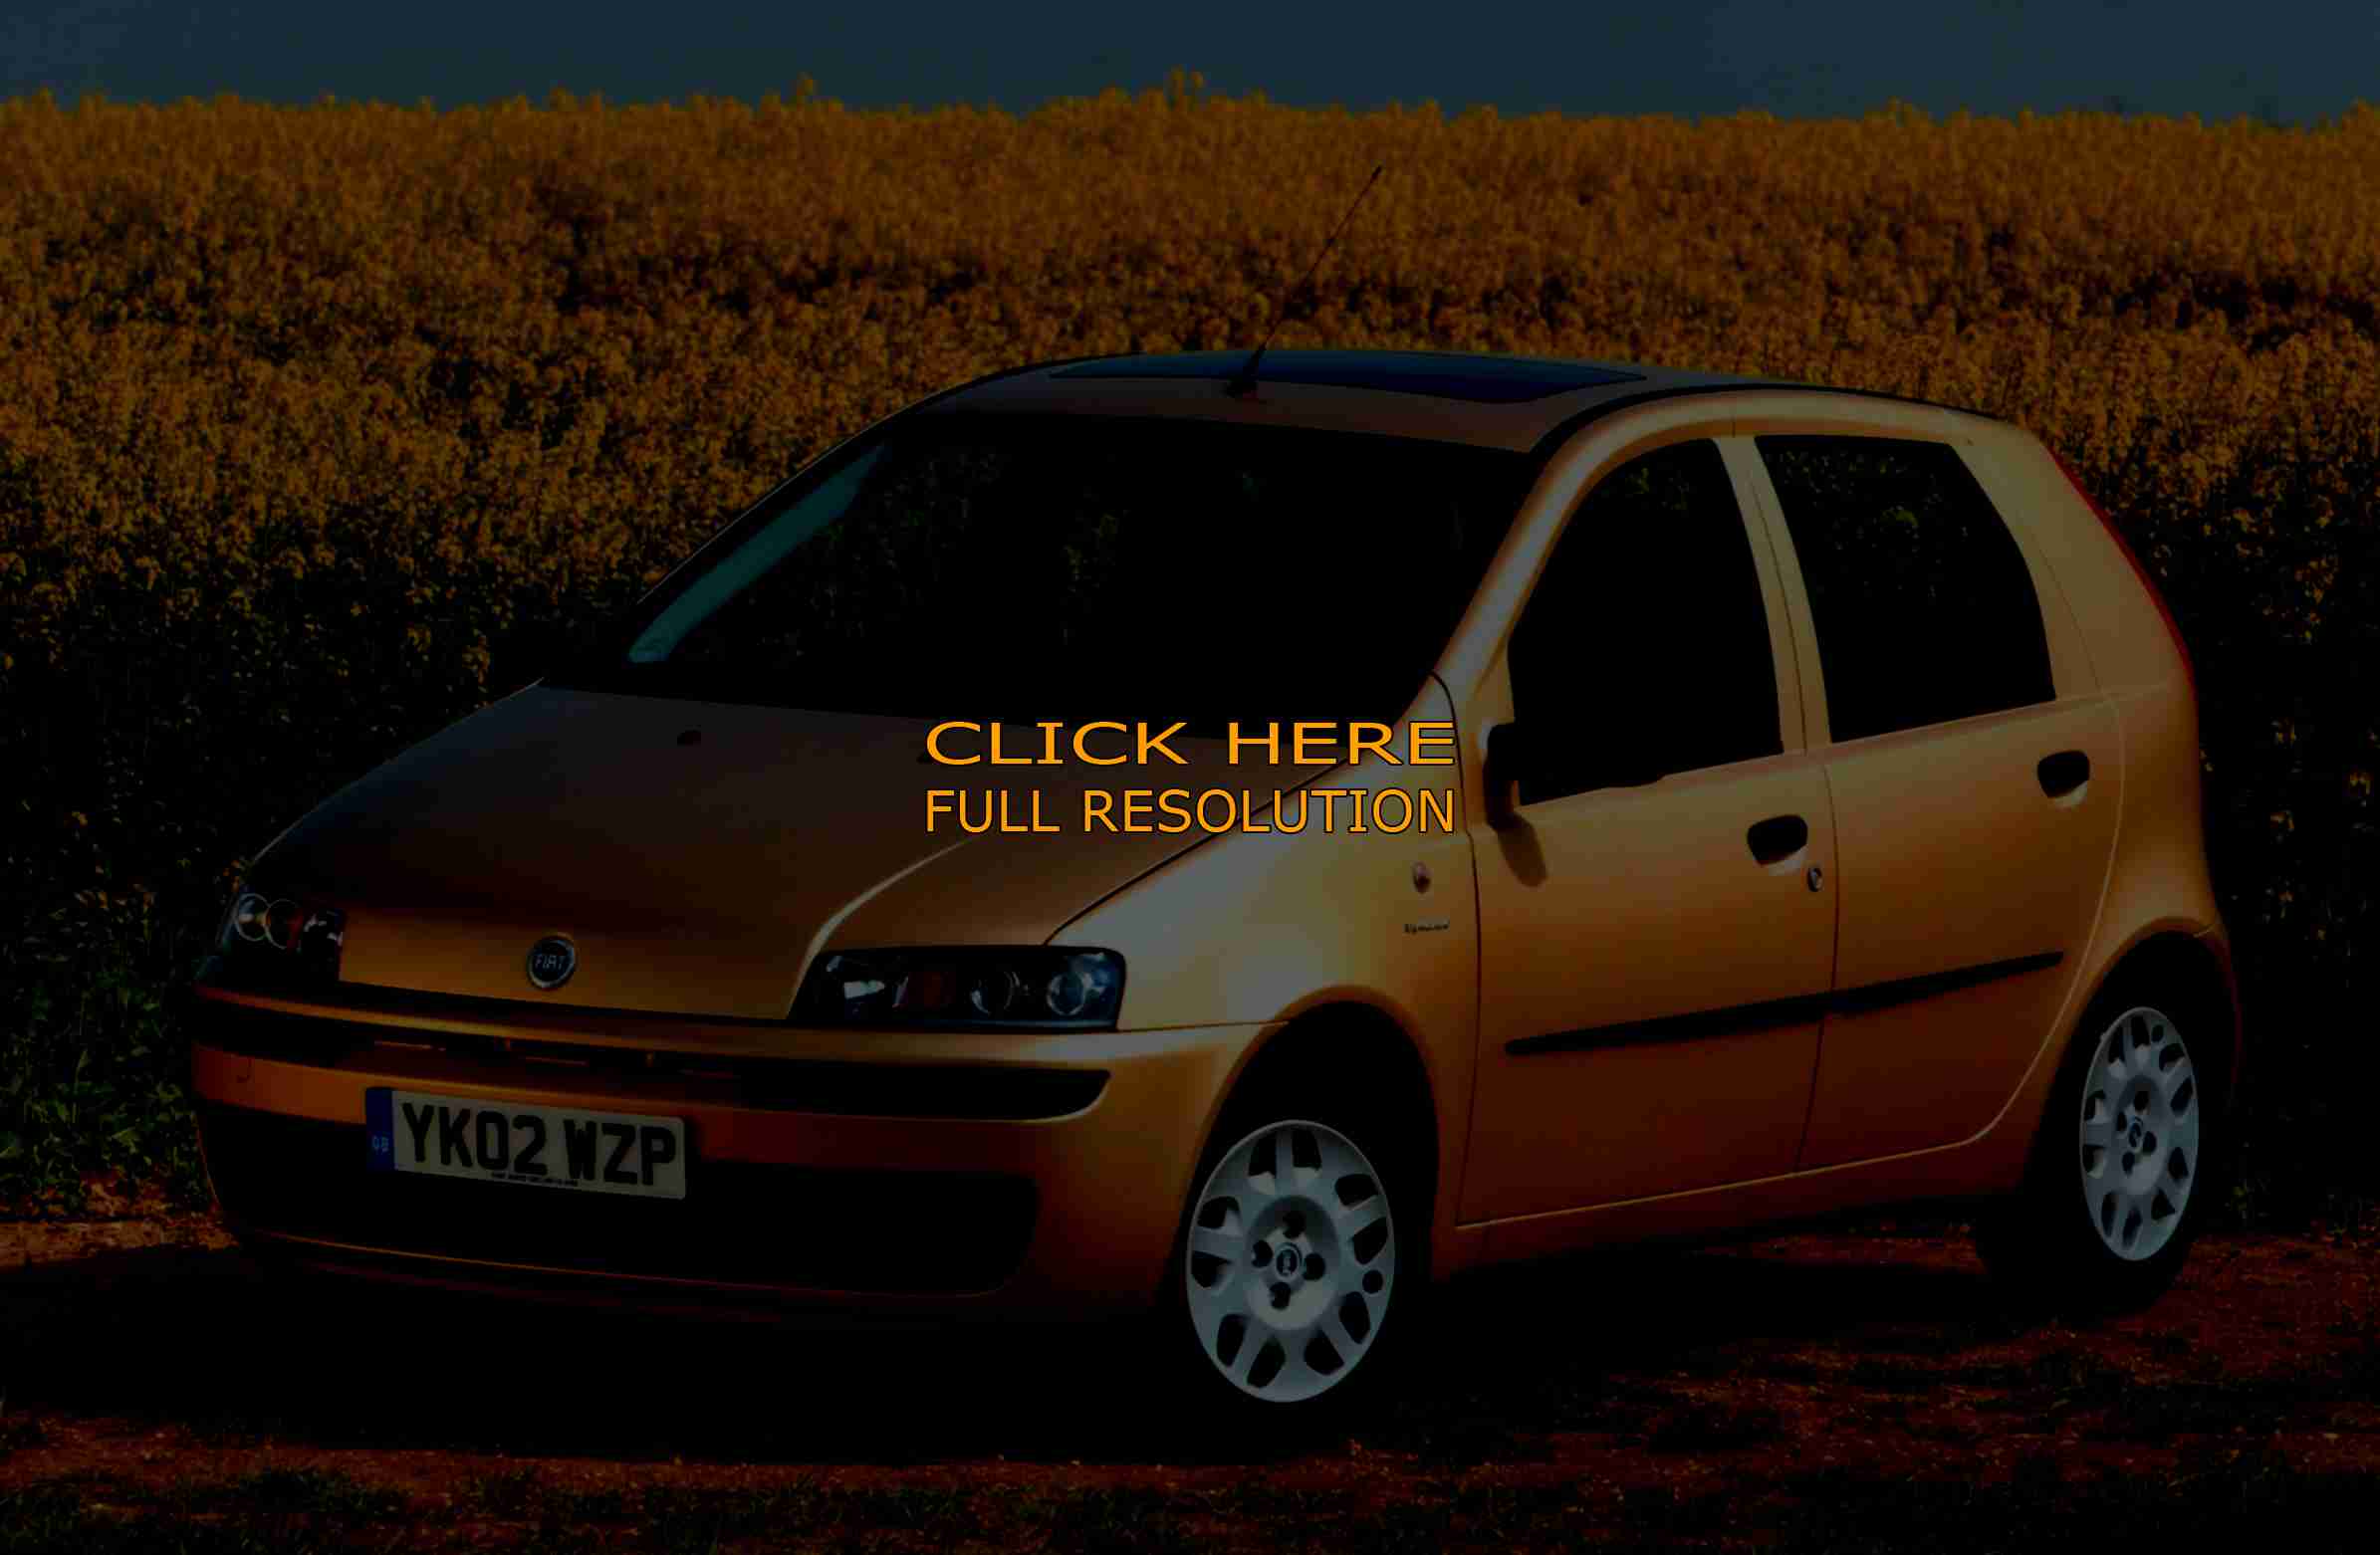 Fiat Punto. Besides the entry-level model, Fiat offered a sporting model